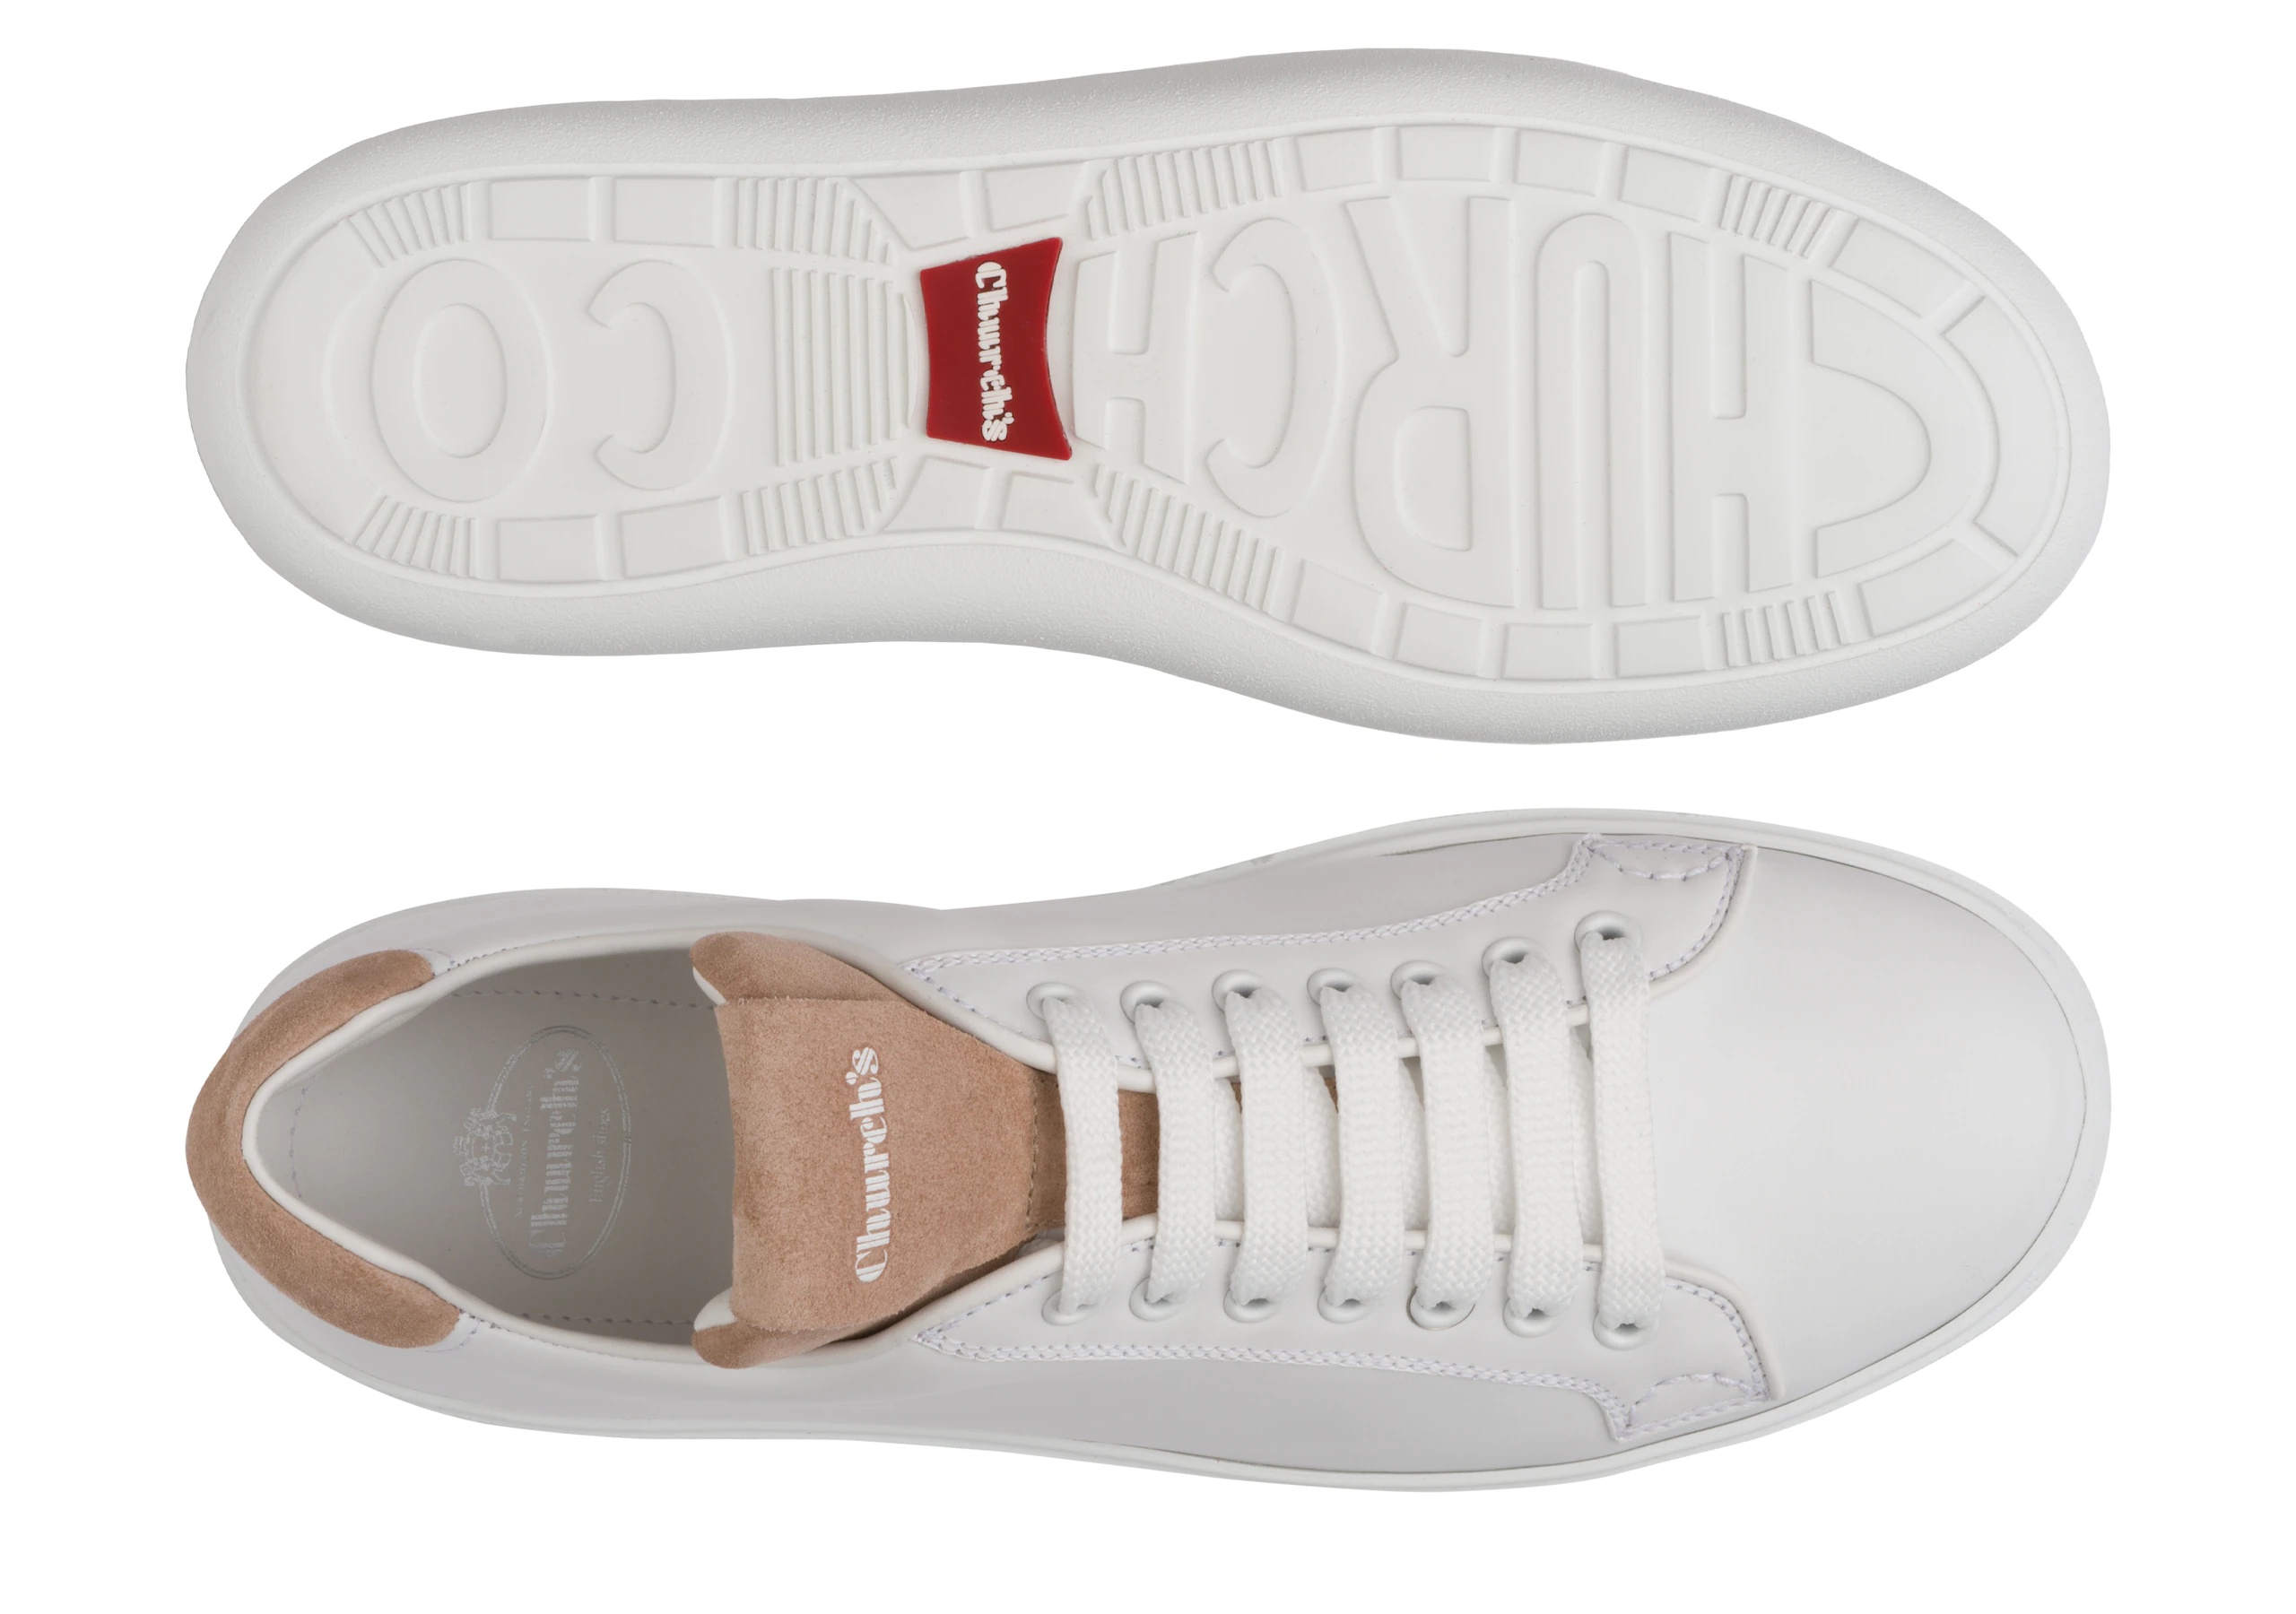 Boland
Calf Leather and Suede Classic Sneaker White/blush - 3